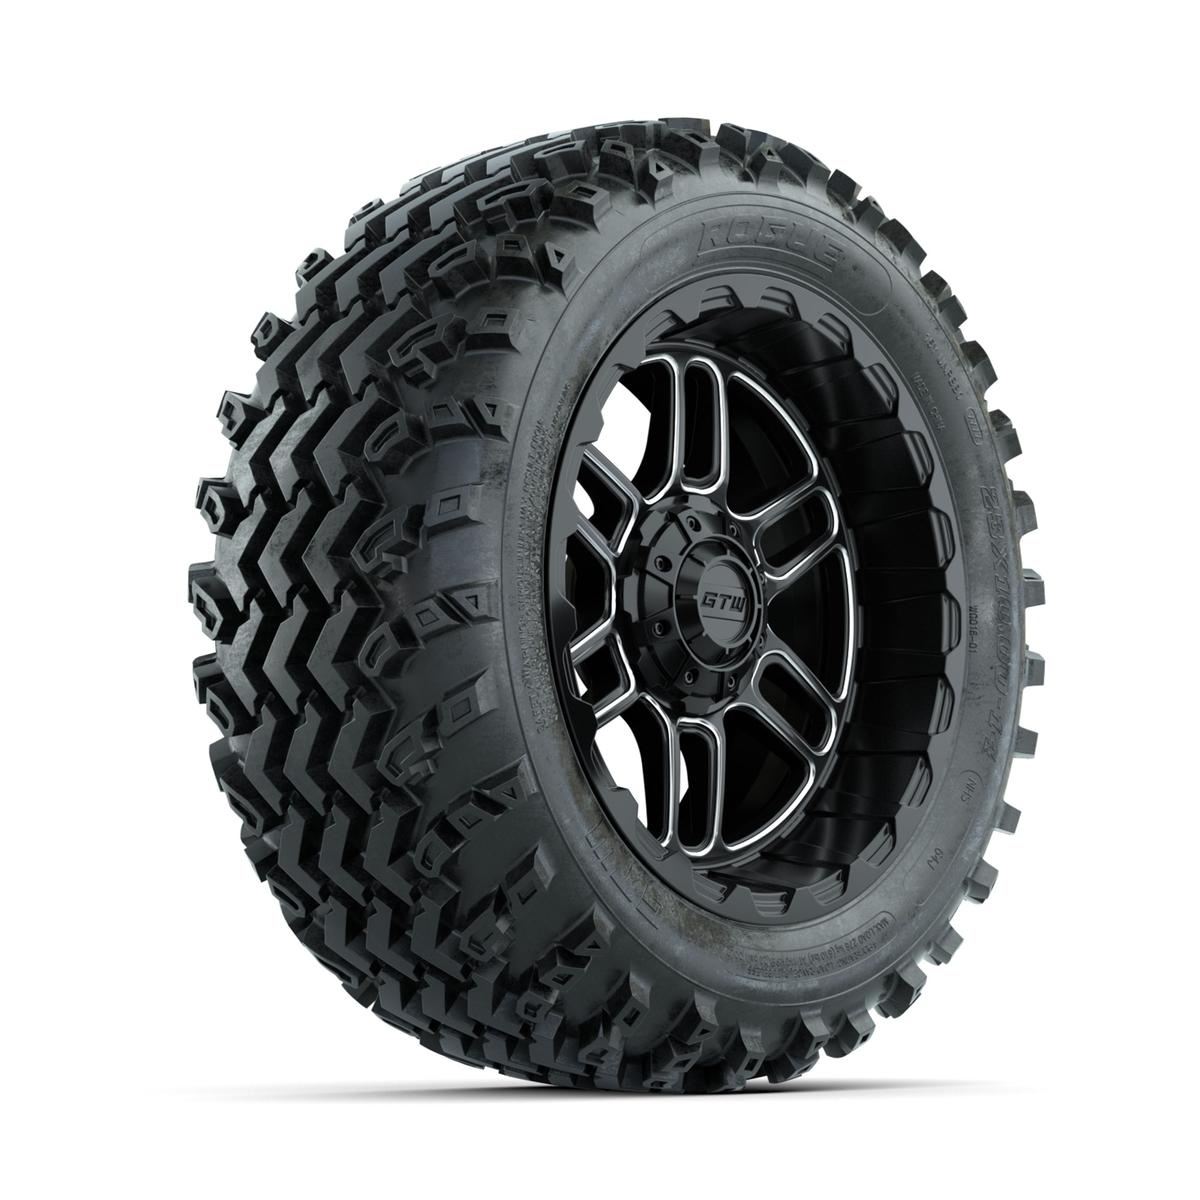 GTW Titan Machined/Black 14 in Wheels with 23x10.00-14 Rogue All Terrain Tires – Full Set